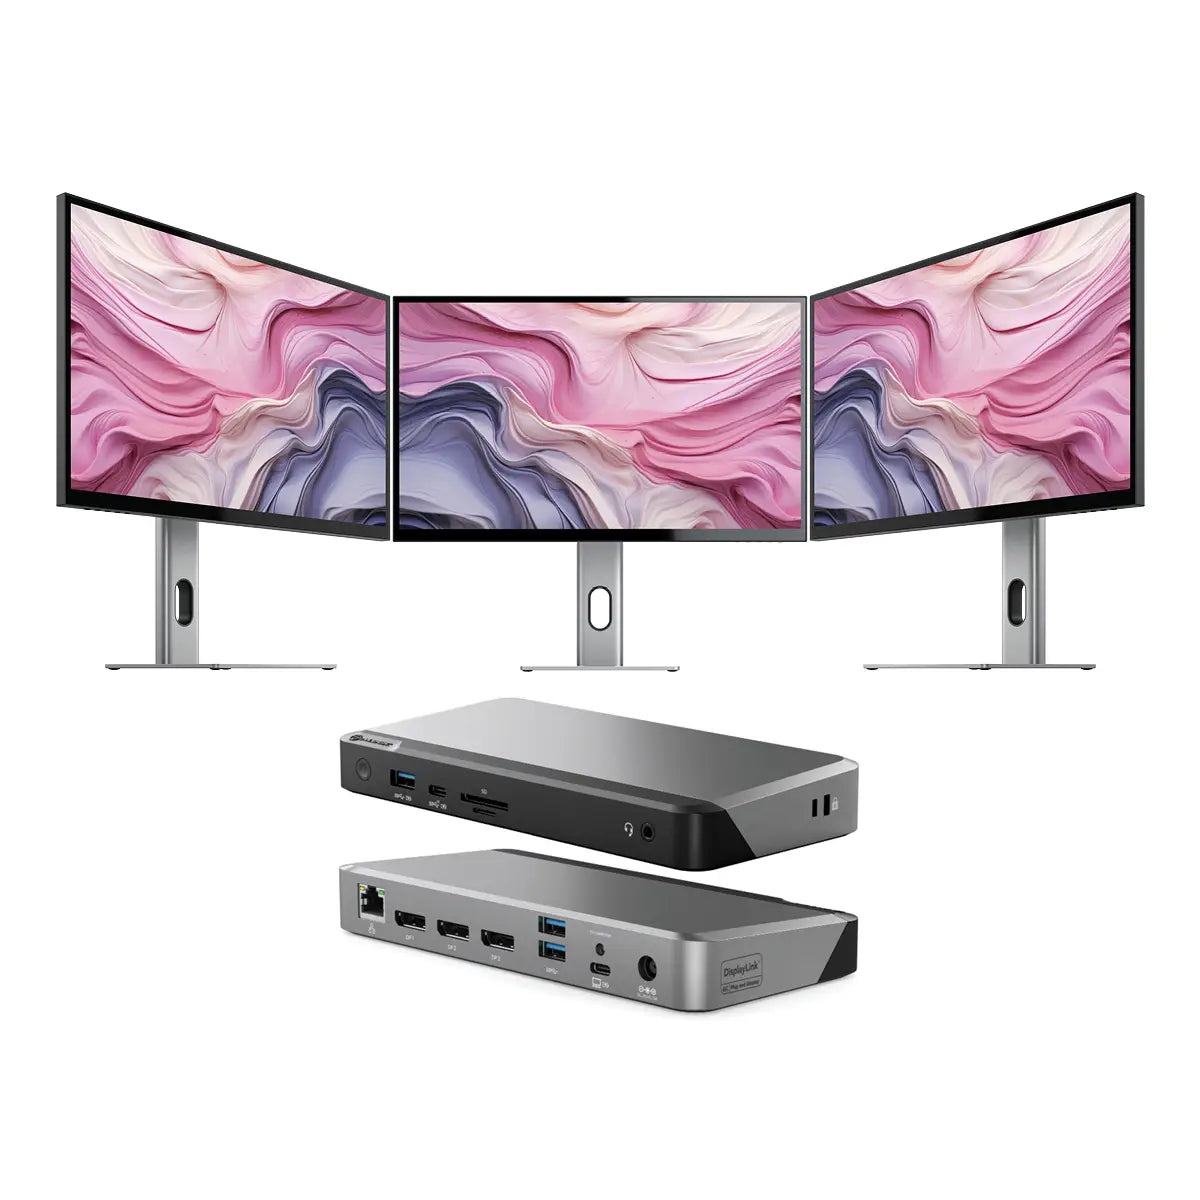 clarity-27-uhd-4k-monitor-pack-of-3-dx3-triple-4k-display-universal-docking-station-with-100w-power-delivery1